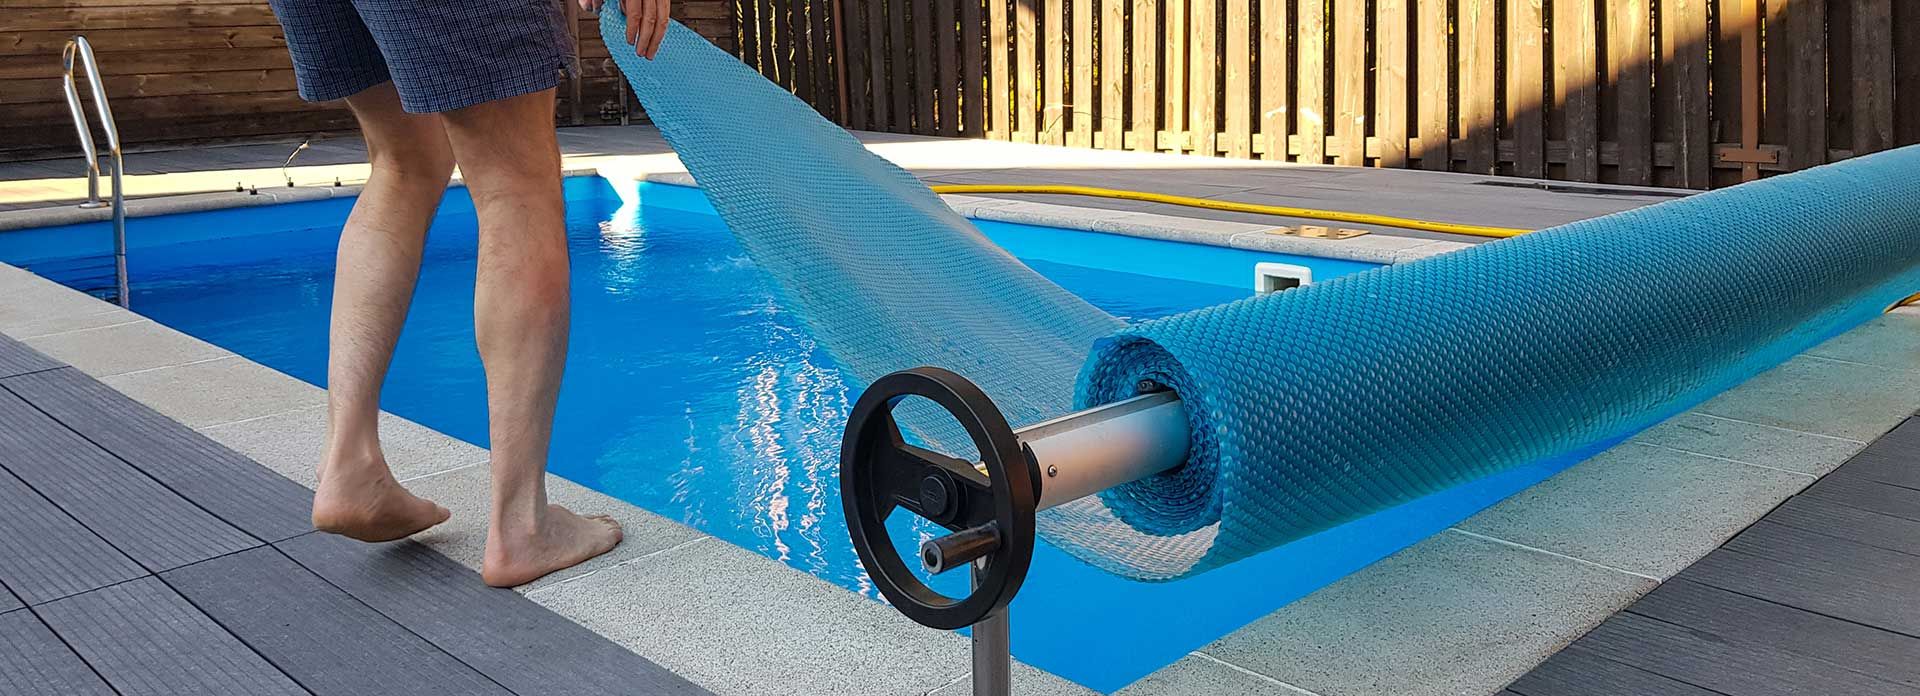 pool with pool safety cover